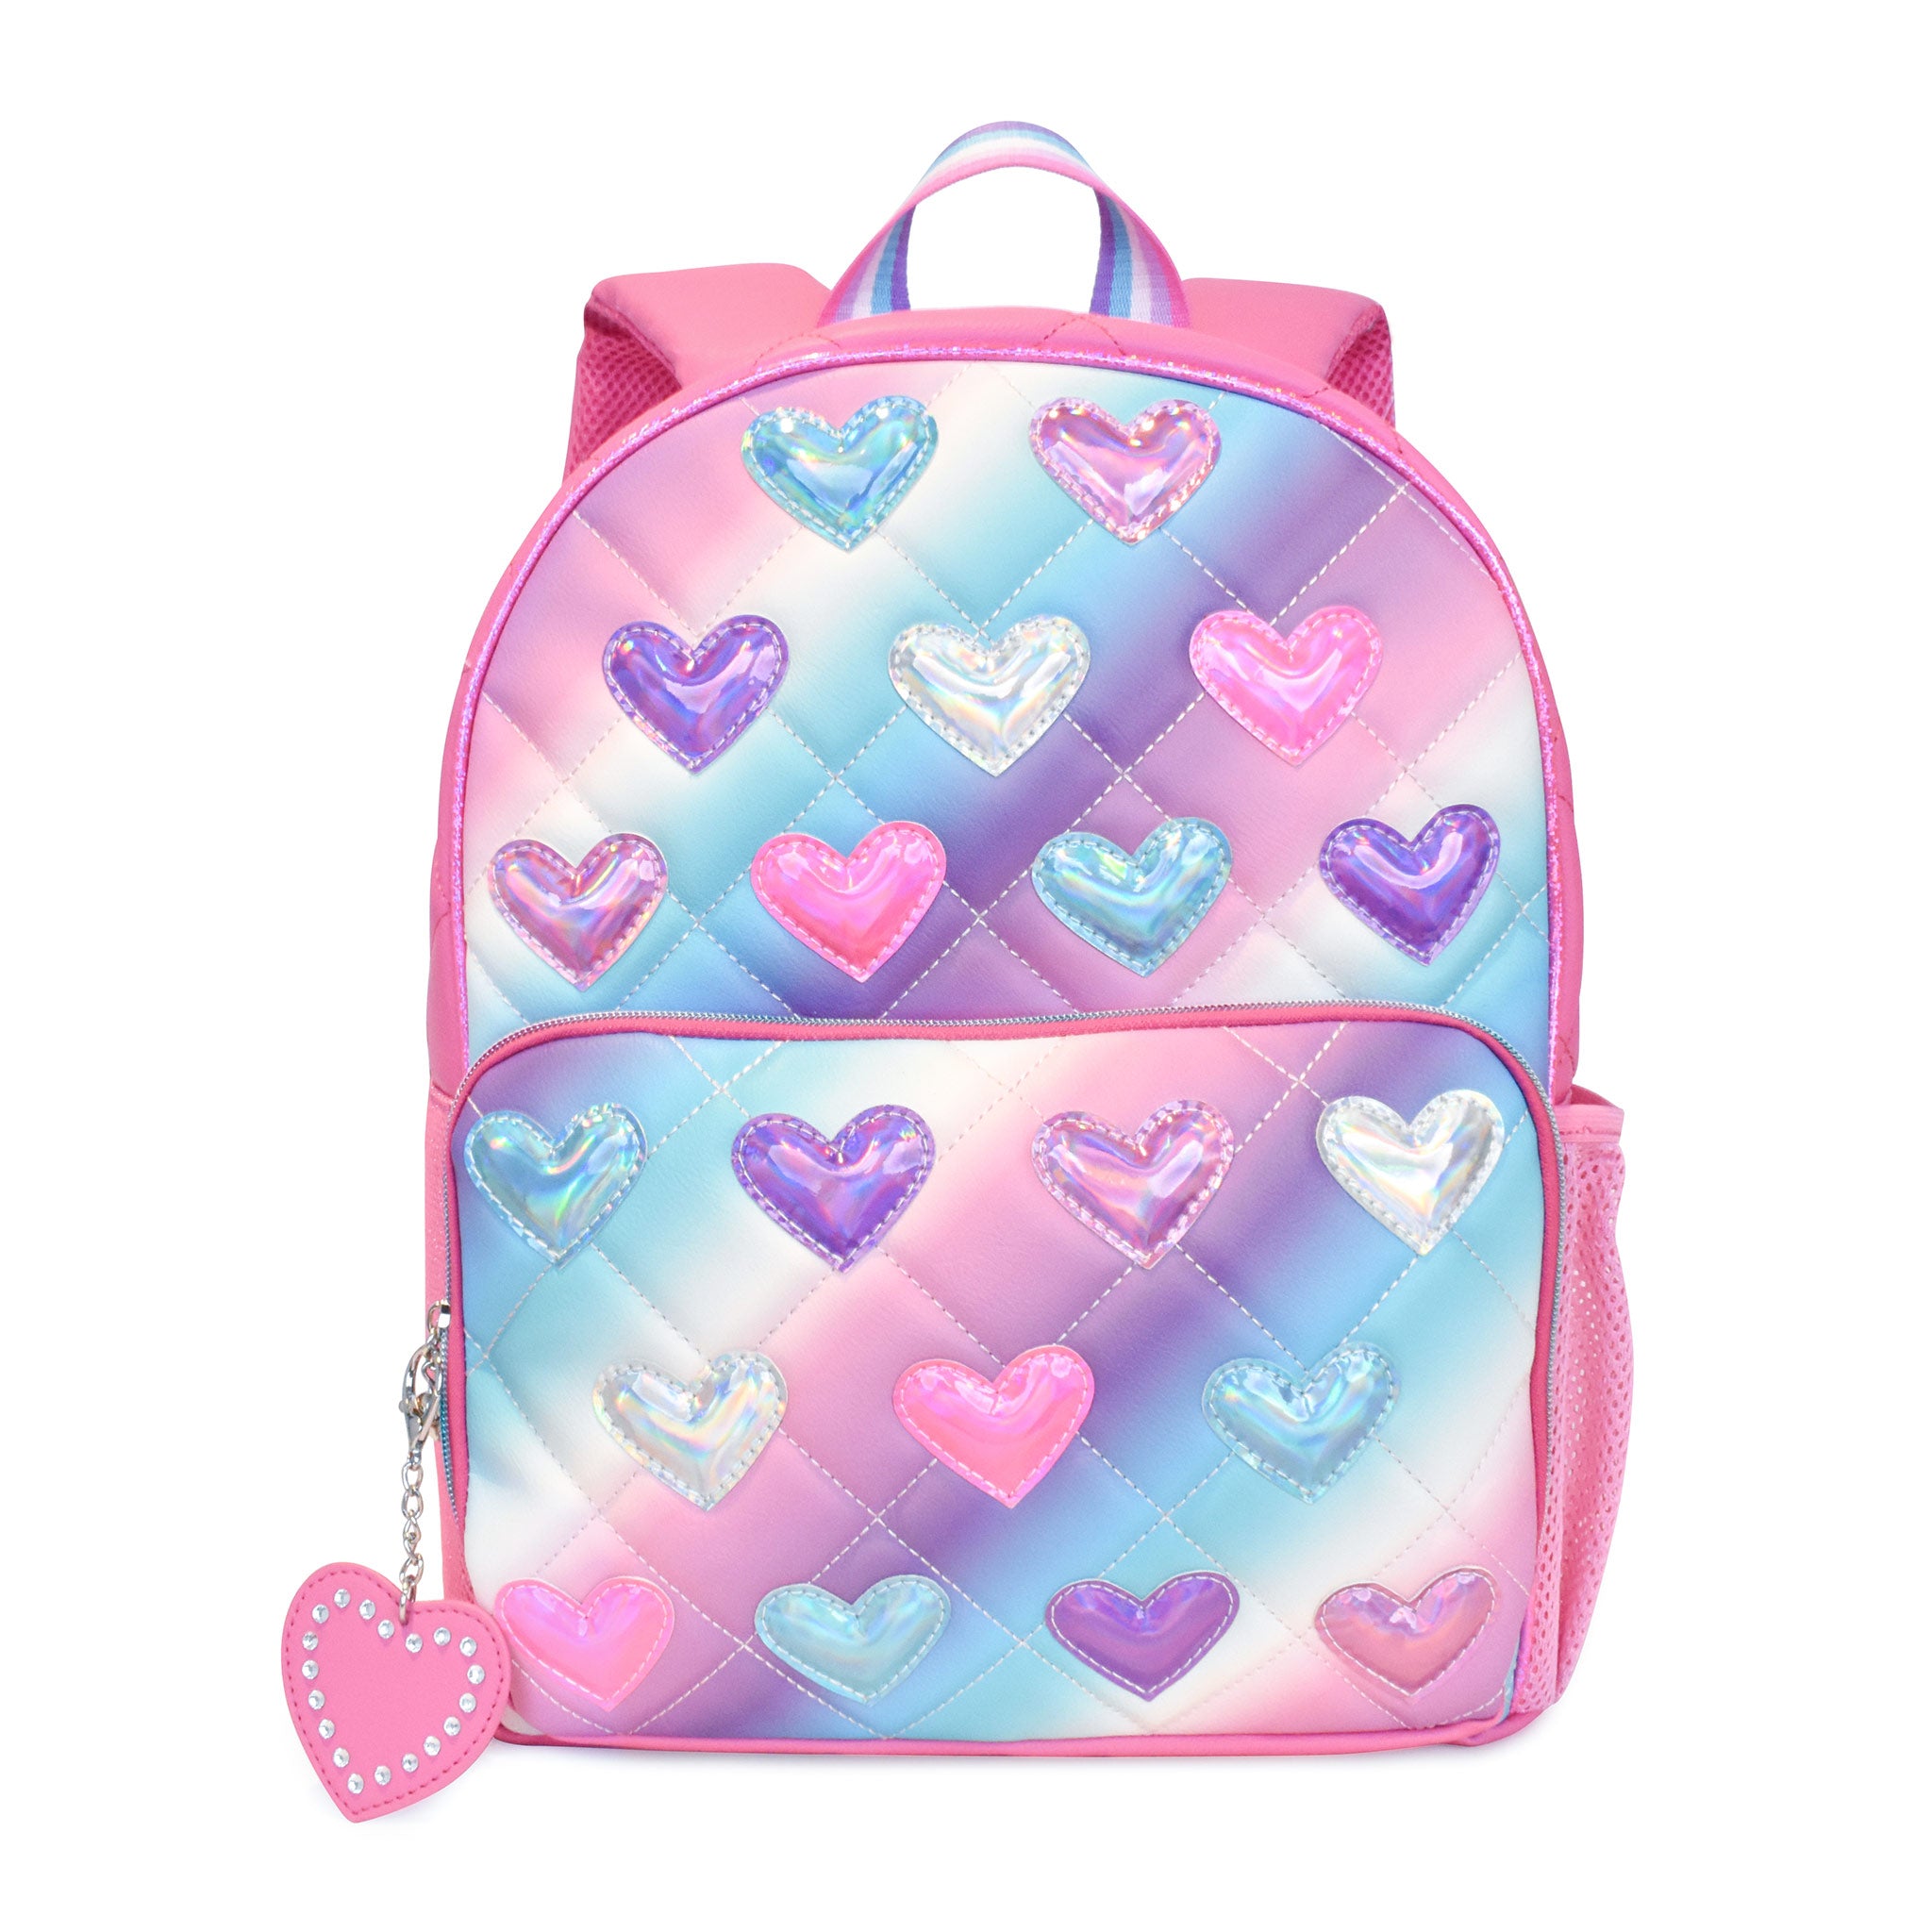 Front view of a cool-pastel ombre large backpack with metallic heart patches and a detachable heart keychain